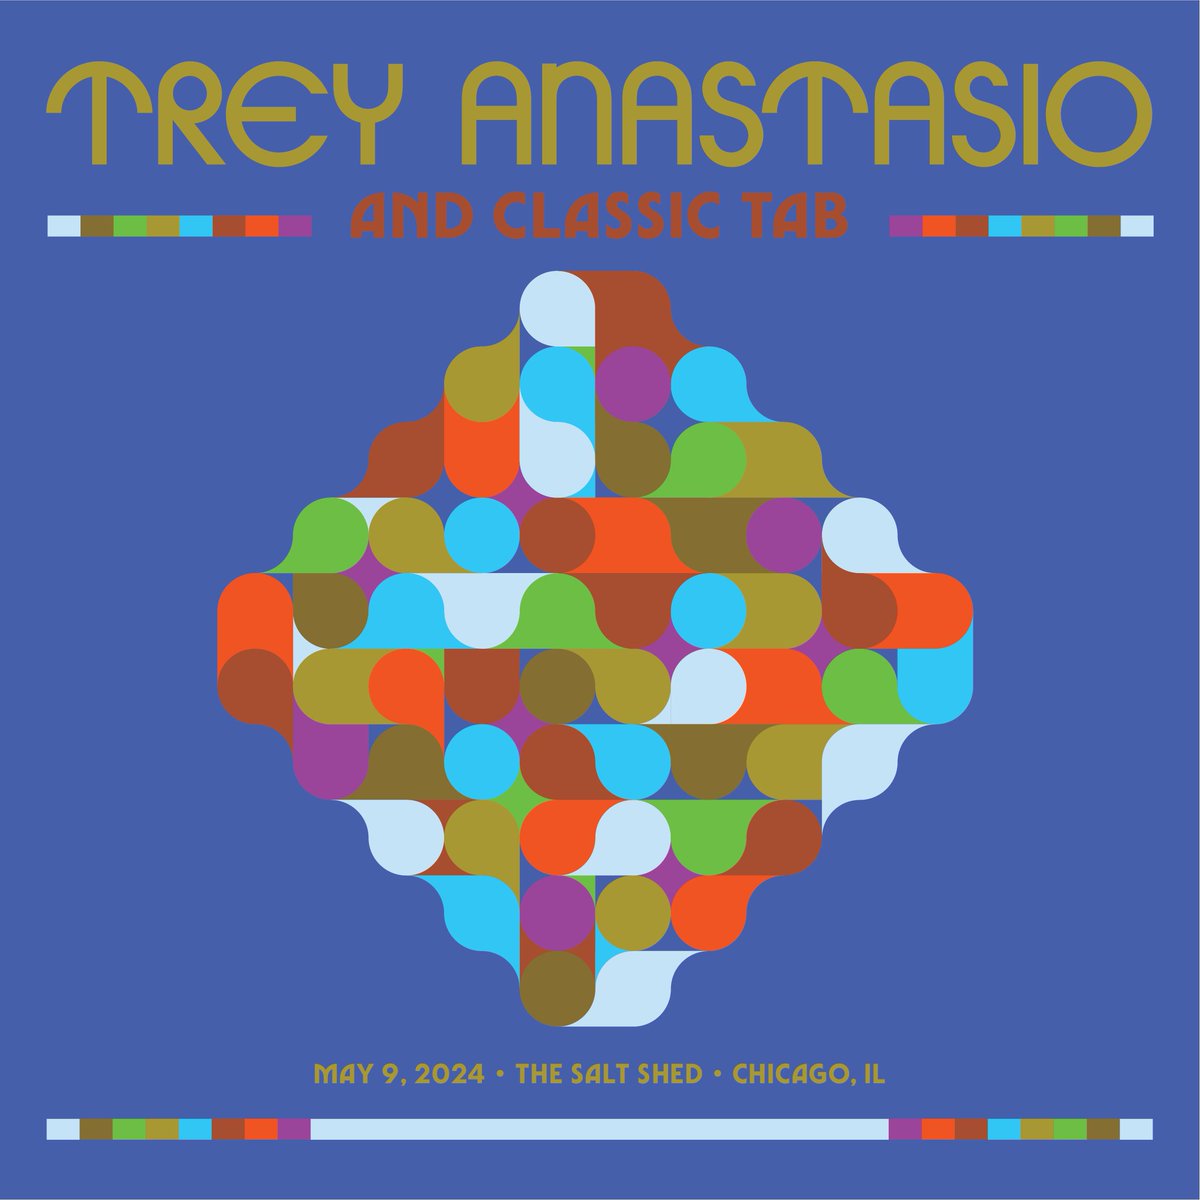 Trey and Classic TAB's show from Chicago, IL on 5/9/24 is available now for download and streaming via the LivePhish App: livephi.sh/trey240509